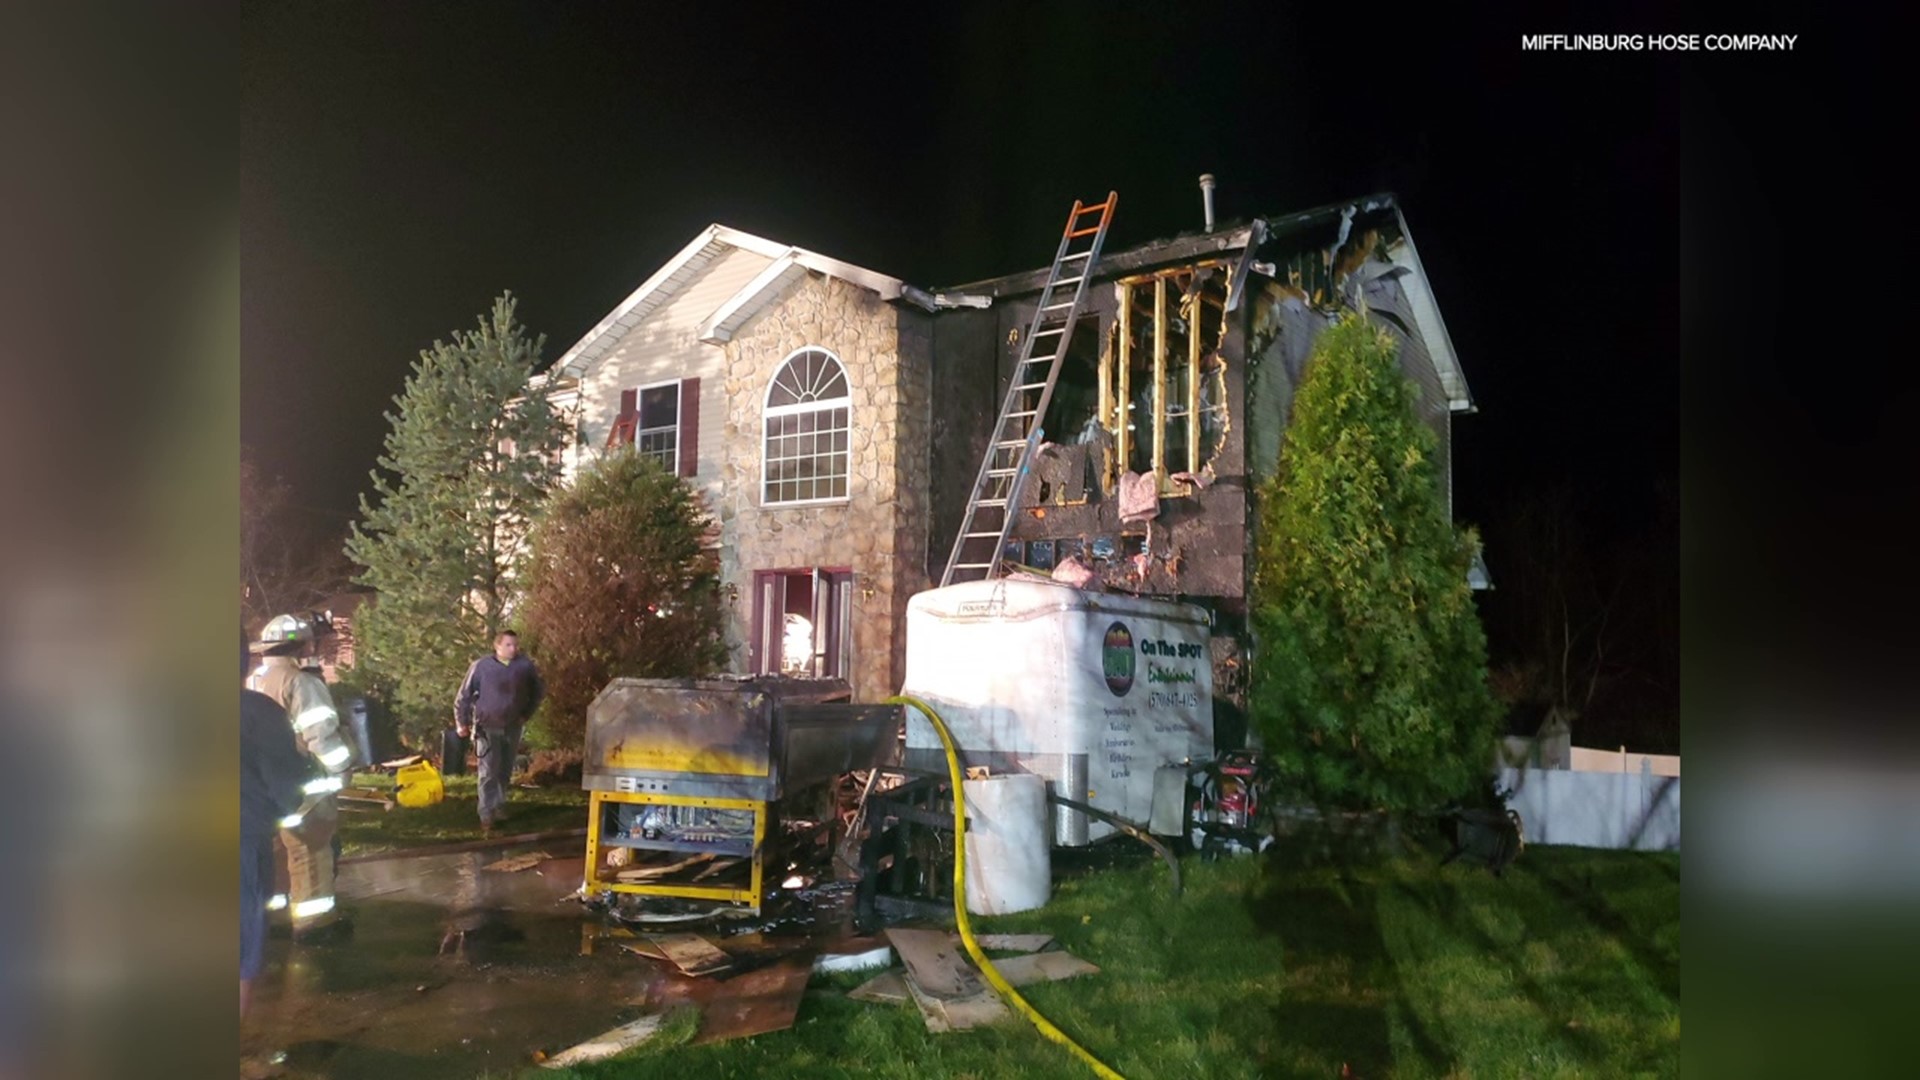 Officials say a machine in the garage started the fire in Mifflinburg.